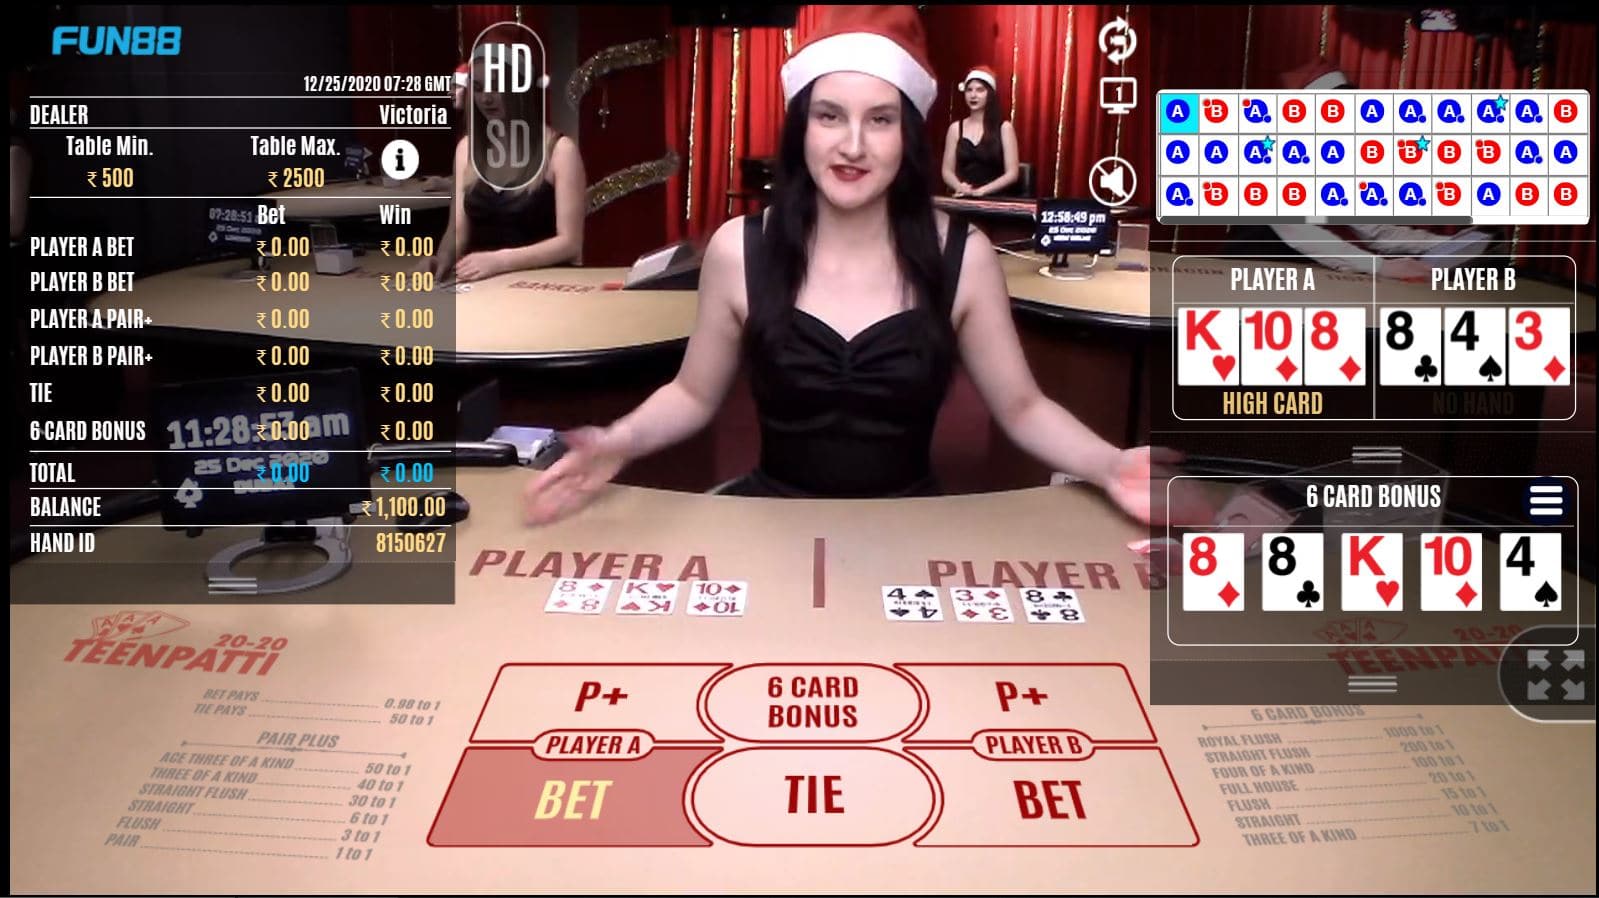 How to play Fun88 casino online: Exciting gaming platform